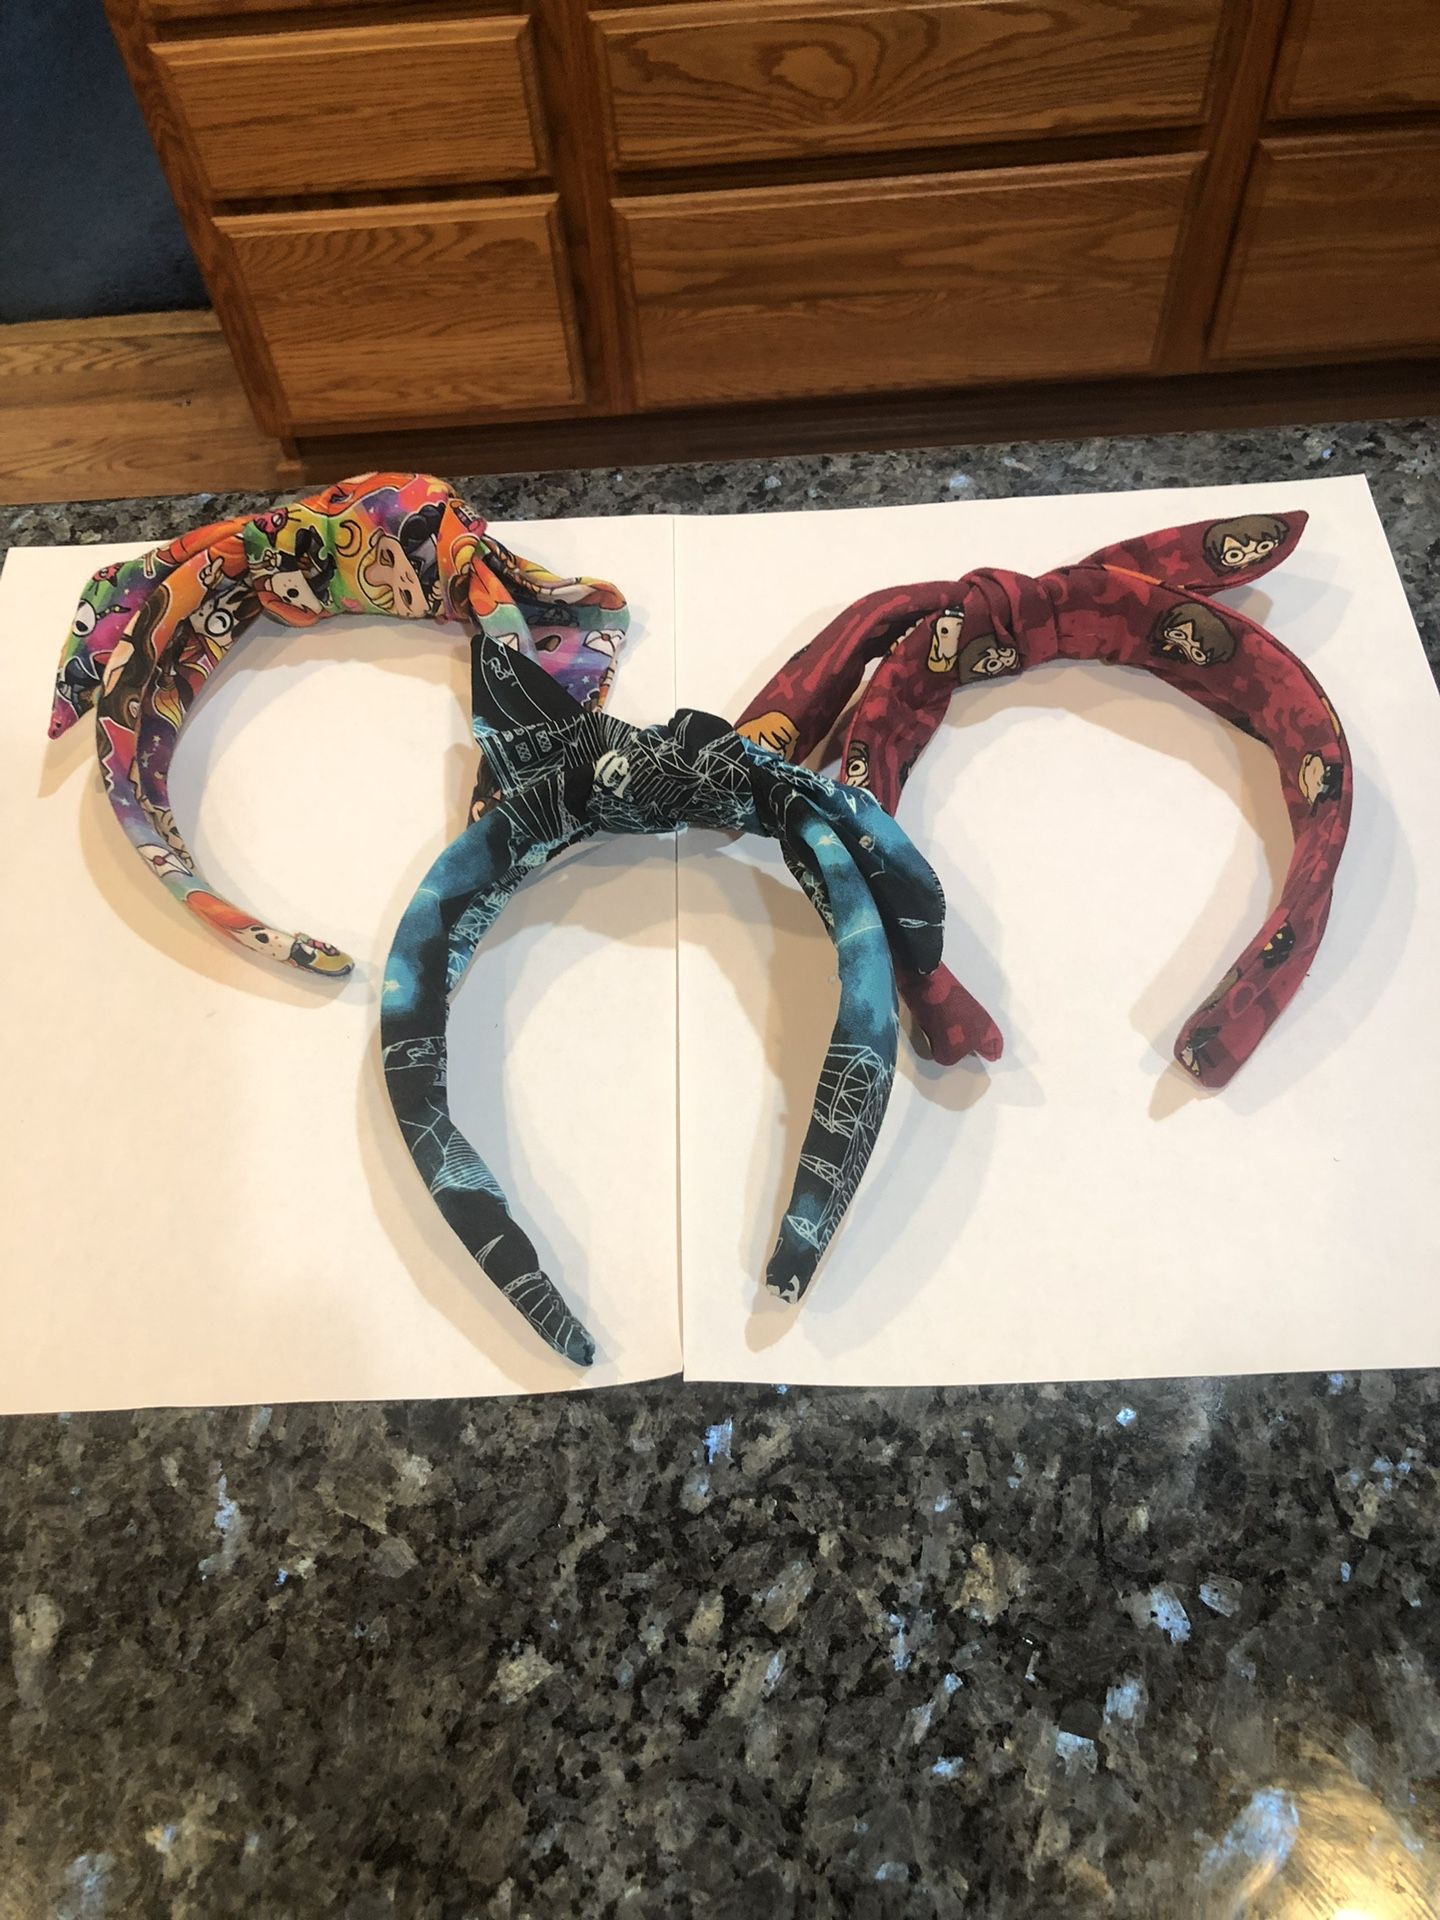 Harry Potter Lot Of 3 Headbands Girls / Women’s Hair Accessory . Preowned Only Wore Once